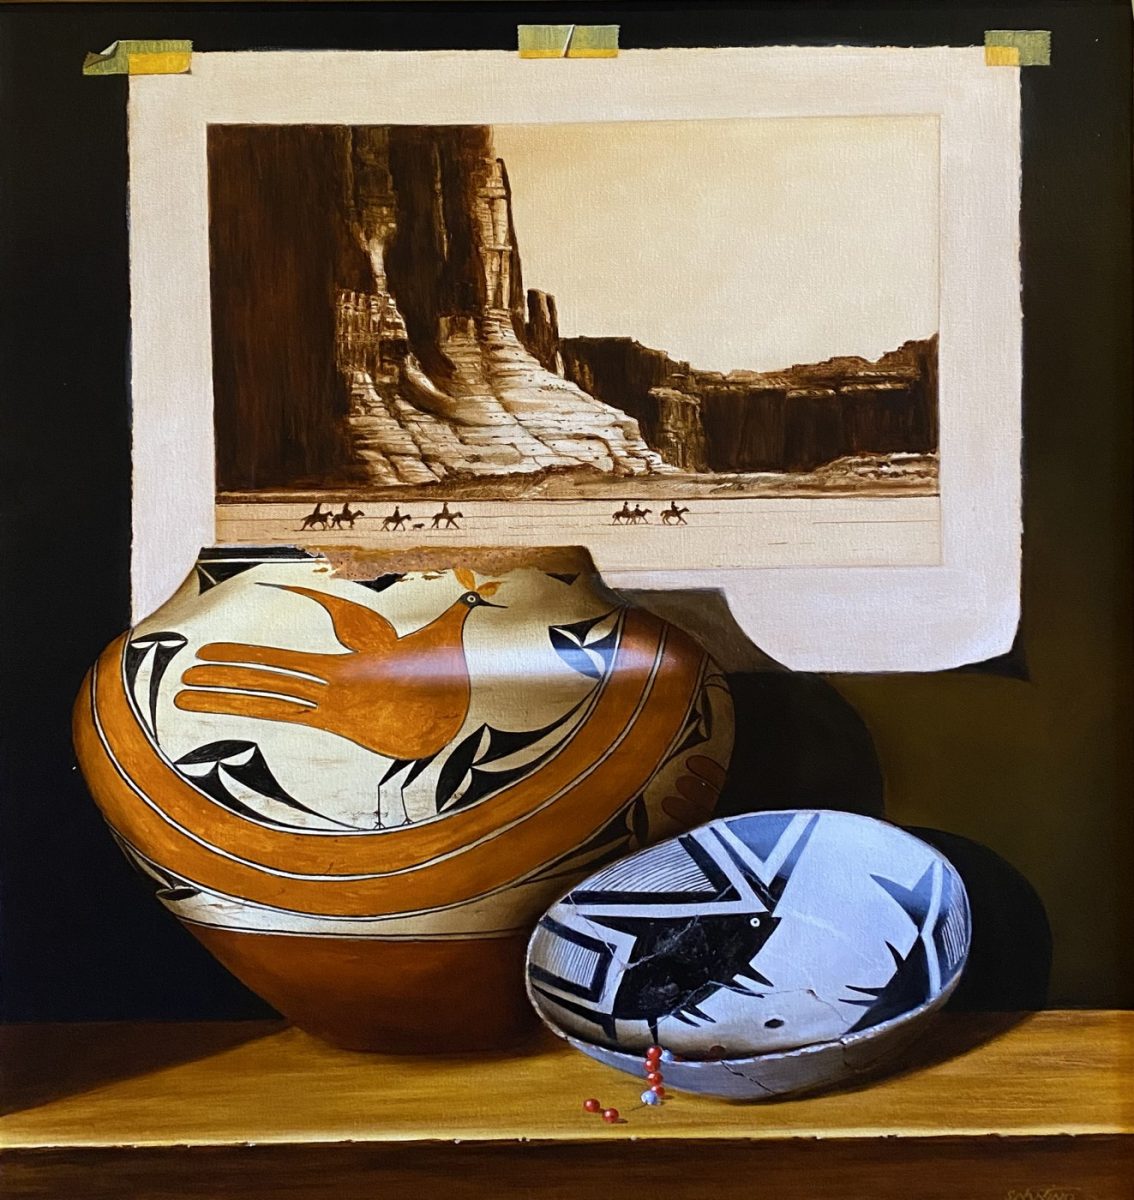 Oil painting of old photograph and native american pottery by Chuck Sabatino